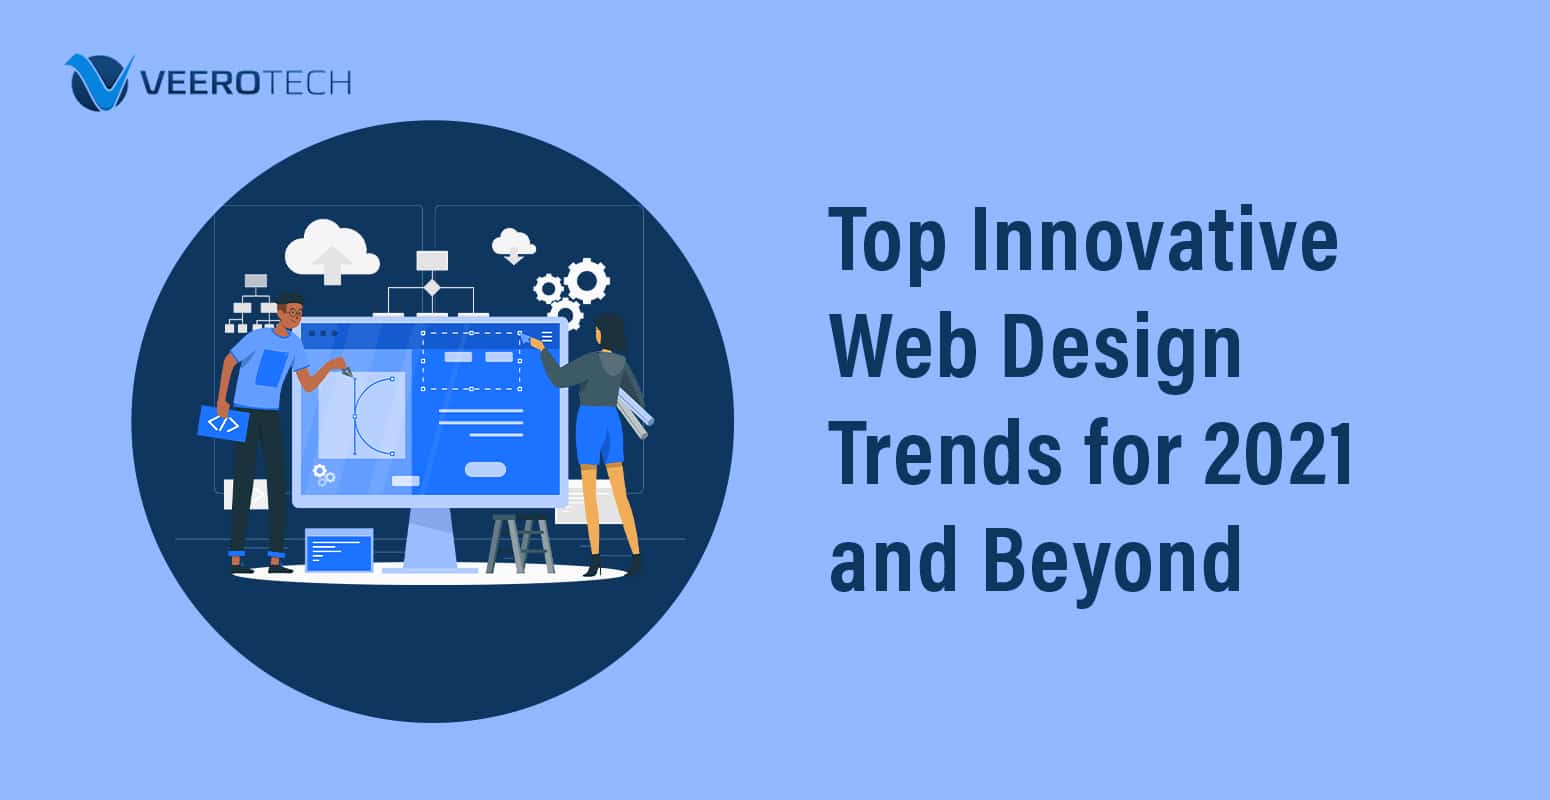 Top Innovative Web Design Trends for 2021 and Beyond